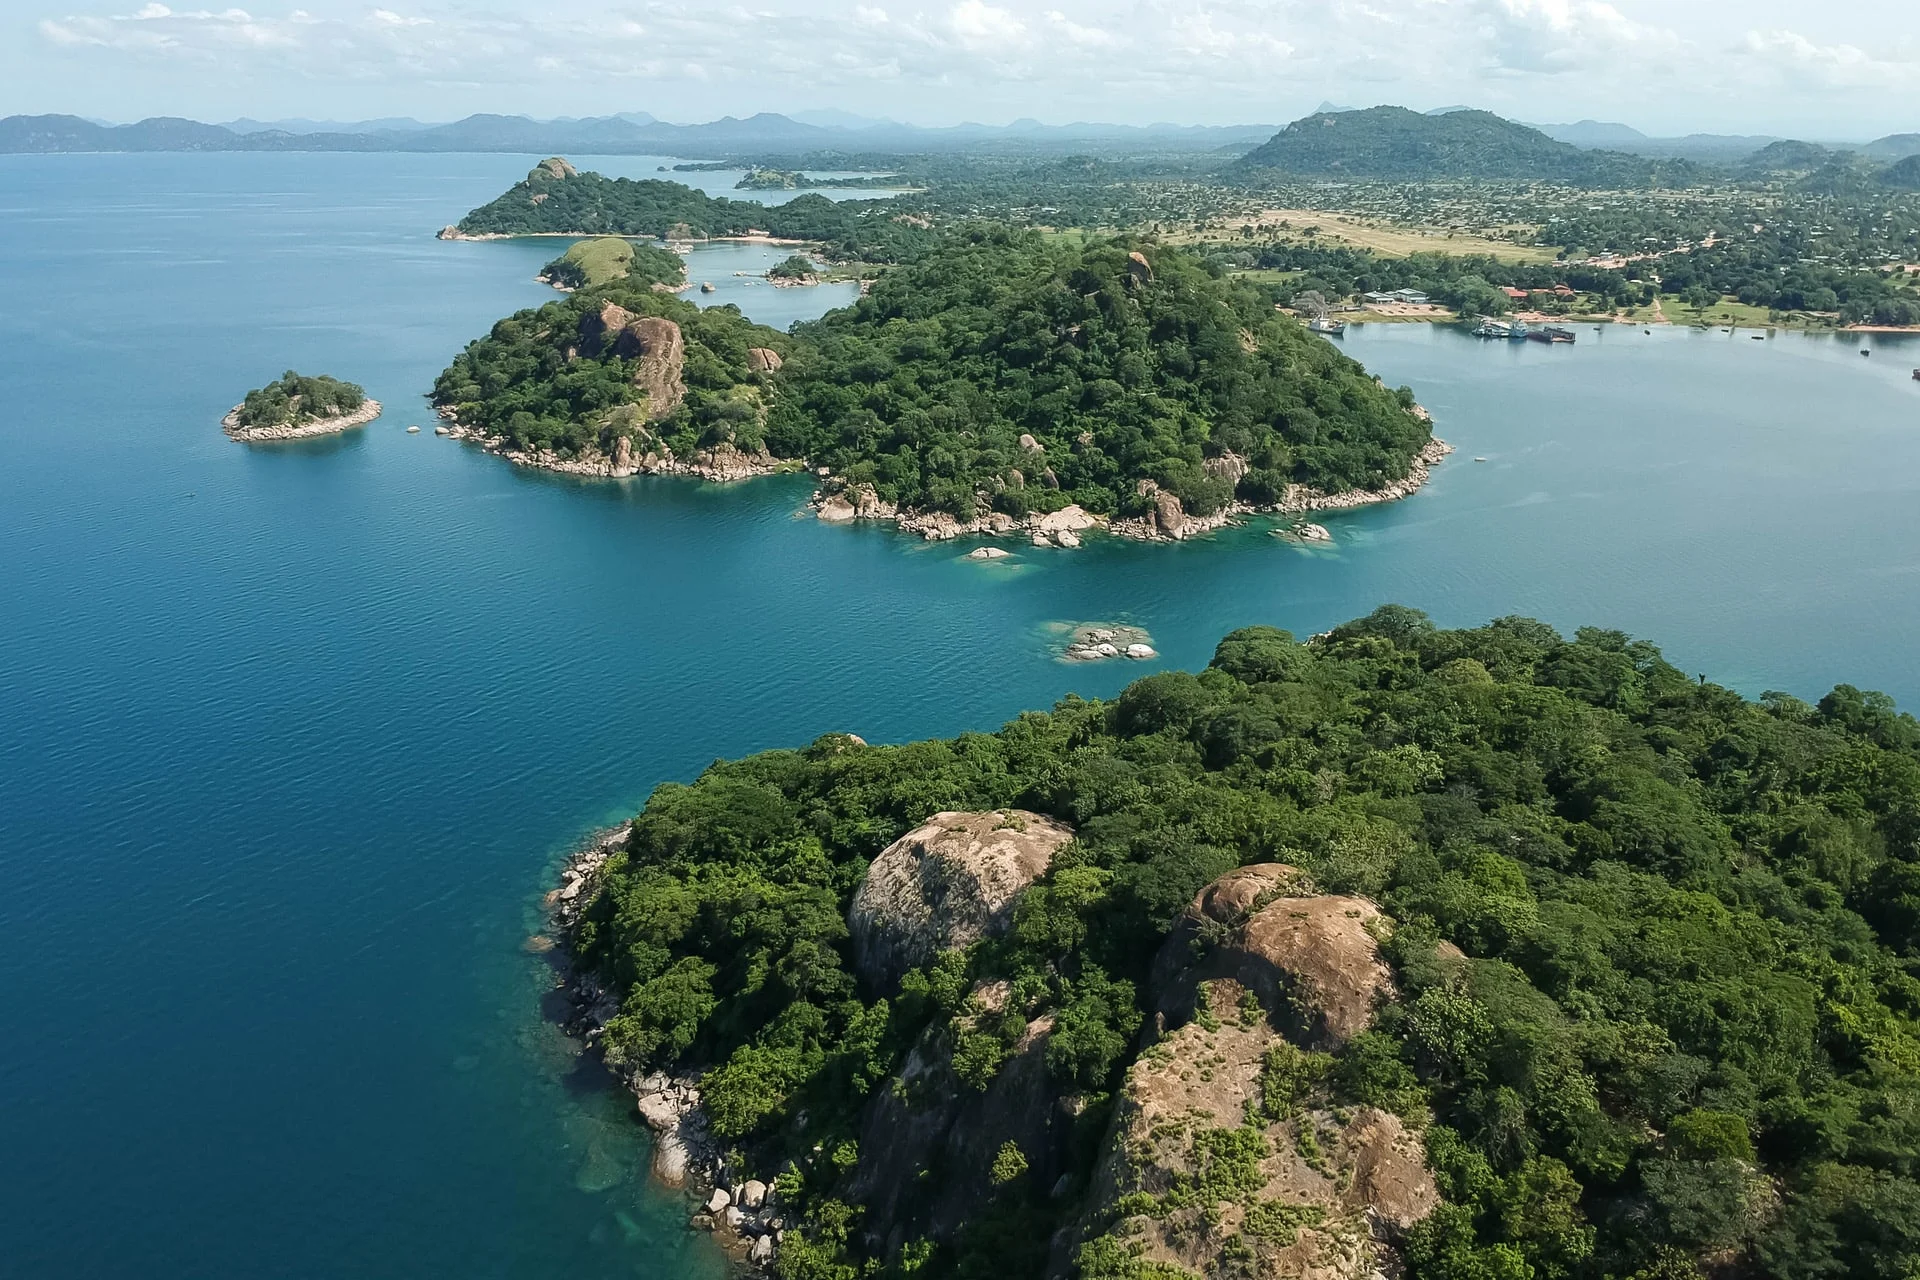 An aerial view of an island in a body of water.